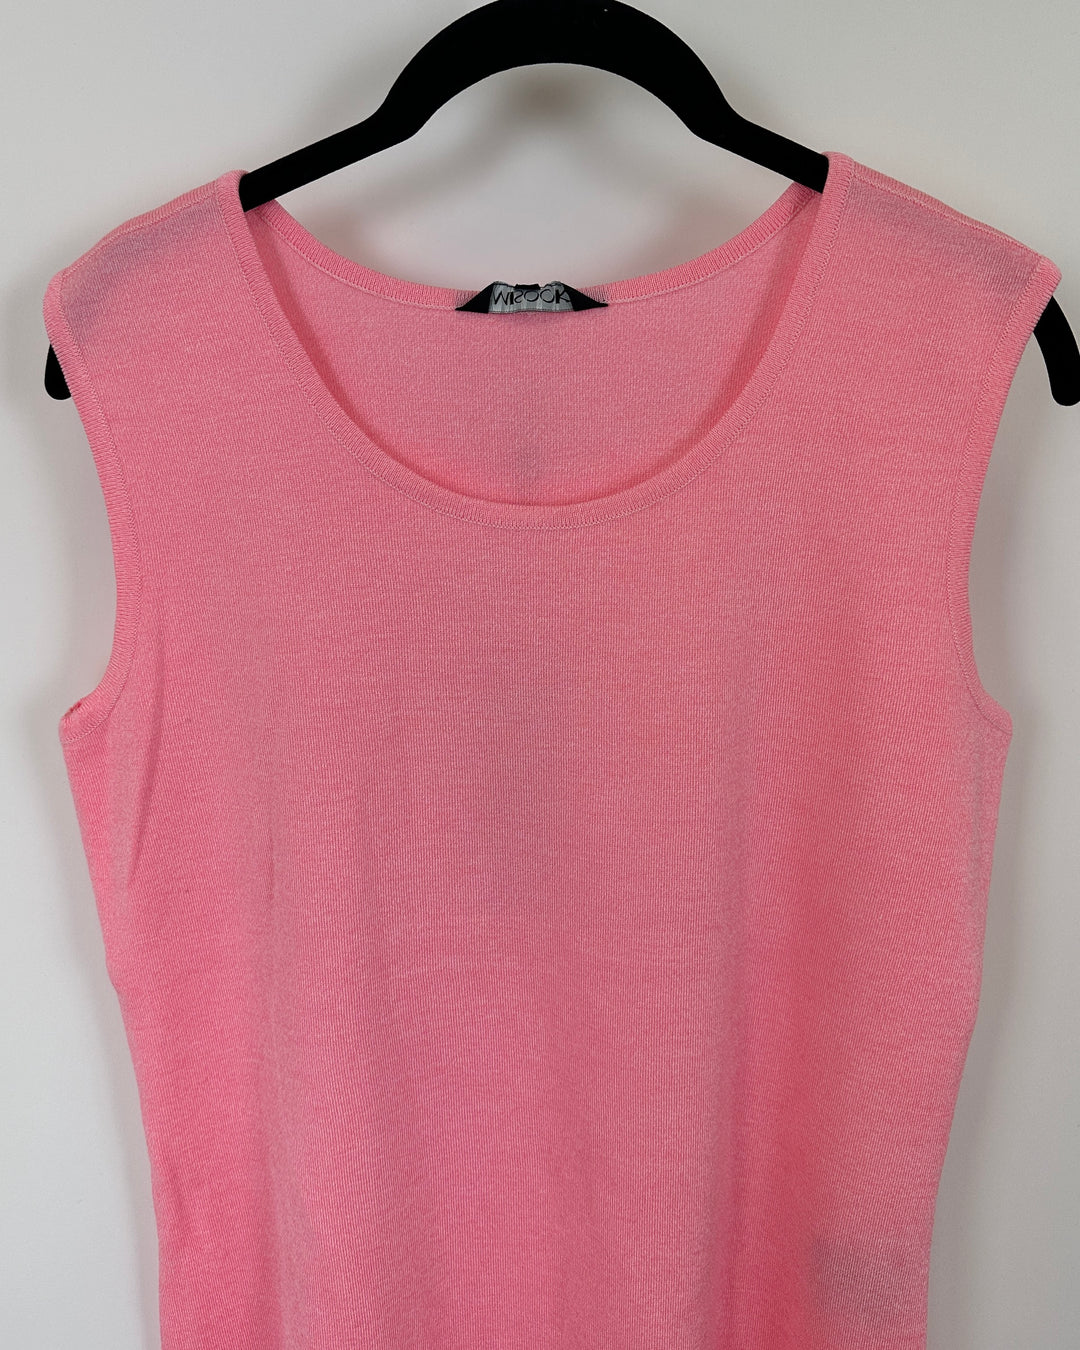 Heathered Pink Knit Tank Top - Size 2-4